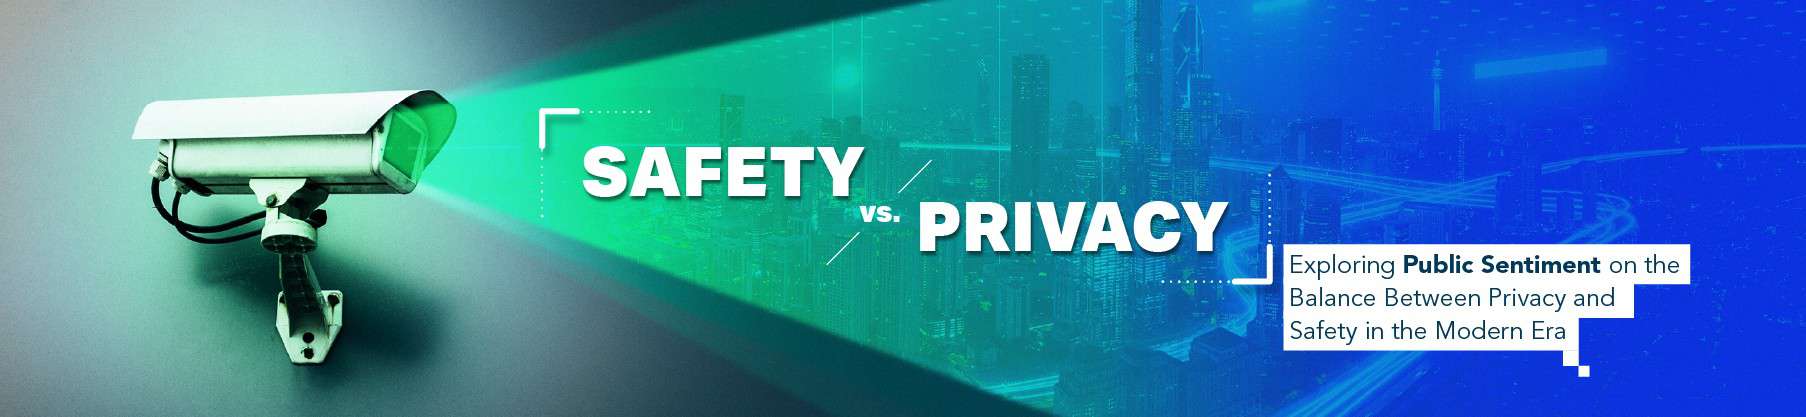 Safety vs. Privacy Featured Image